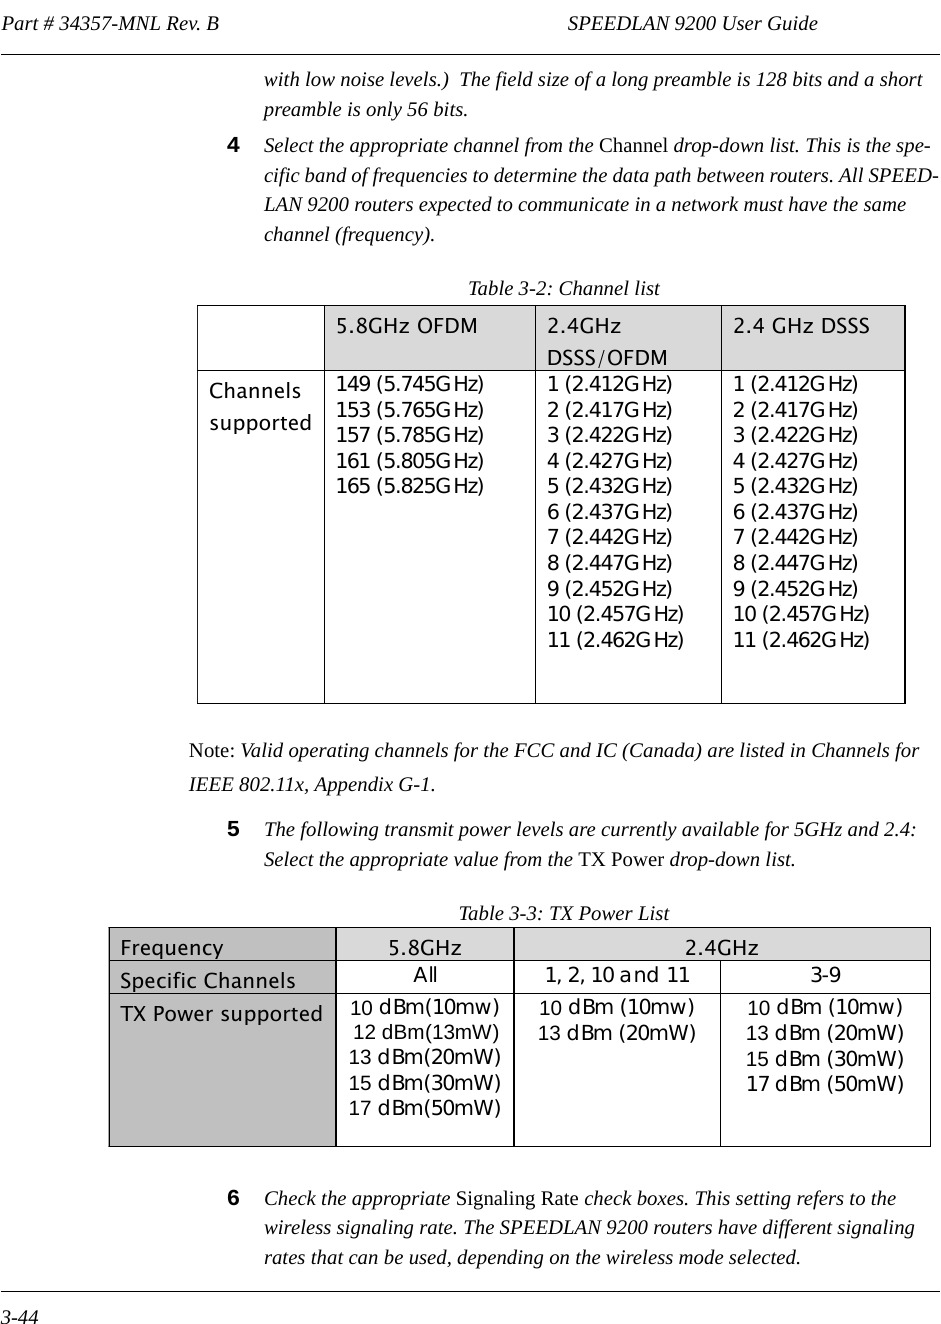 Part # 34357-MNL Rev. B                                                                   SPEEDLAN 9200 User Guide 3-44with low noise levels.)  The field size of a long preamble is 128 bits and a short preamble is only 56 bits.4Select the appropriate channel from the Channel drop-down list. This is the spe-cific band of frequencies to determine the data path between routers. All SPEED-LAN 9200 routers expected to communicate in a network must have the same channel (frequency).Table 3-2: Channel listNote: Valid operating channels for the FCC and IC (Canada) are listed in Channels for IEEE 802.11x, Appendix G-1.5The following transmit power levels are currently available for 5GHz and 2.4: Select the appropriate value from the TX Power drop-down list. Table 3-3: TX Power List6Check the appropriate Signaling Rate check boxes. This setting refers to the wireless signaling rate. The SPEEDLAN 9200 routers have different signaling rates that can be used, depending on the wireless mode selected.   5.8GHz OFDM  2.4GHz DSSS/OFDM  2.4 GHz DSSS Channels supported 149 (5.745GHz) 153 (5.765GHz)  157 (5.785GHz) 161 (5.805GHz) 165 (5.825GHz) 1 (2.412GHz)  2 (2.417GHz) 3 (2.422GHz)  4 (2.427GHz) 5 (2.432GHz)  6 (2.437GHz)  7 (2.442GHz)  8 (2.447GHz)  9 (2.452GHz)  10 (2.457GHz)  11 (2.462GHz)   1 (2.412GHz)  2 (2.417GHz) 3 (2.422GHz)  4 (2.427GHz) 5 (2.432GHz)  6 (2.437GHz)  7 (2.442GHz)  8 (2.447GHz)  9 (2.452GHz)  10 (2.457GHz)  11 (2.462GHz) Frequency 5.8GHz  2.4GHz Specific Channels        All  1, 2, 10 and 11  3-9 TX Power supported 10 dBm(10mw)  12 dBm(13mW) 13 dBm(20mW) 15 dBm(30mW) 17 dBm(50mW)  10 dBm (10mw) 13 dBm (20mW)  10 dBm (10mw) 13 dBm (20mW) 15 dBm (30mW) 17 dBm (50mW) 